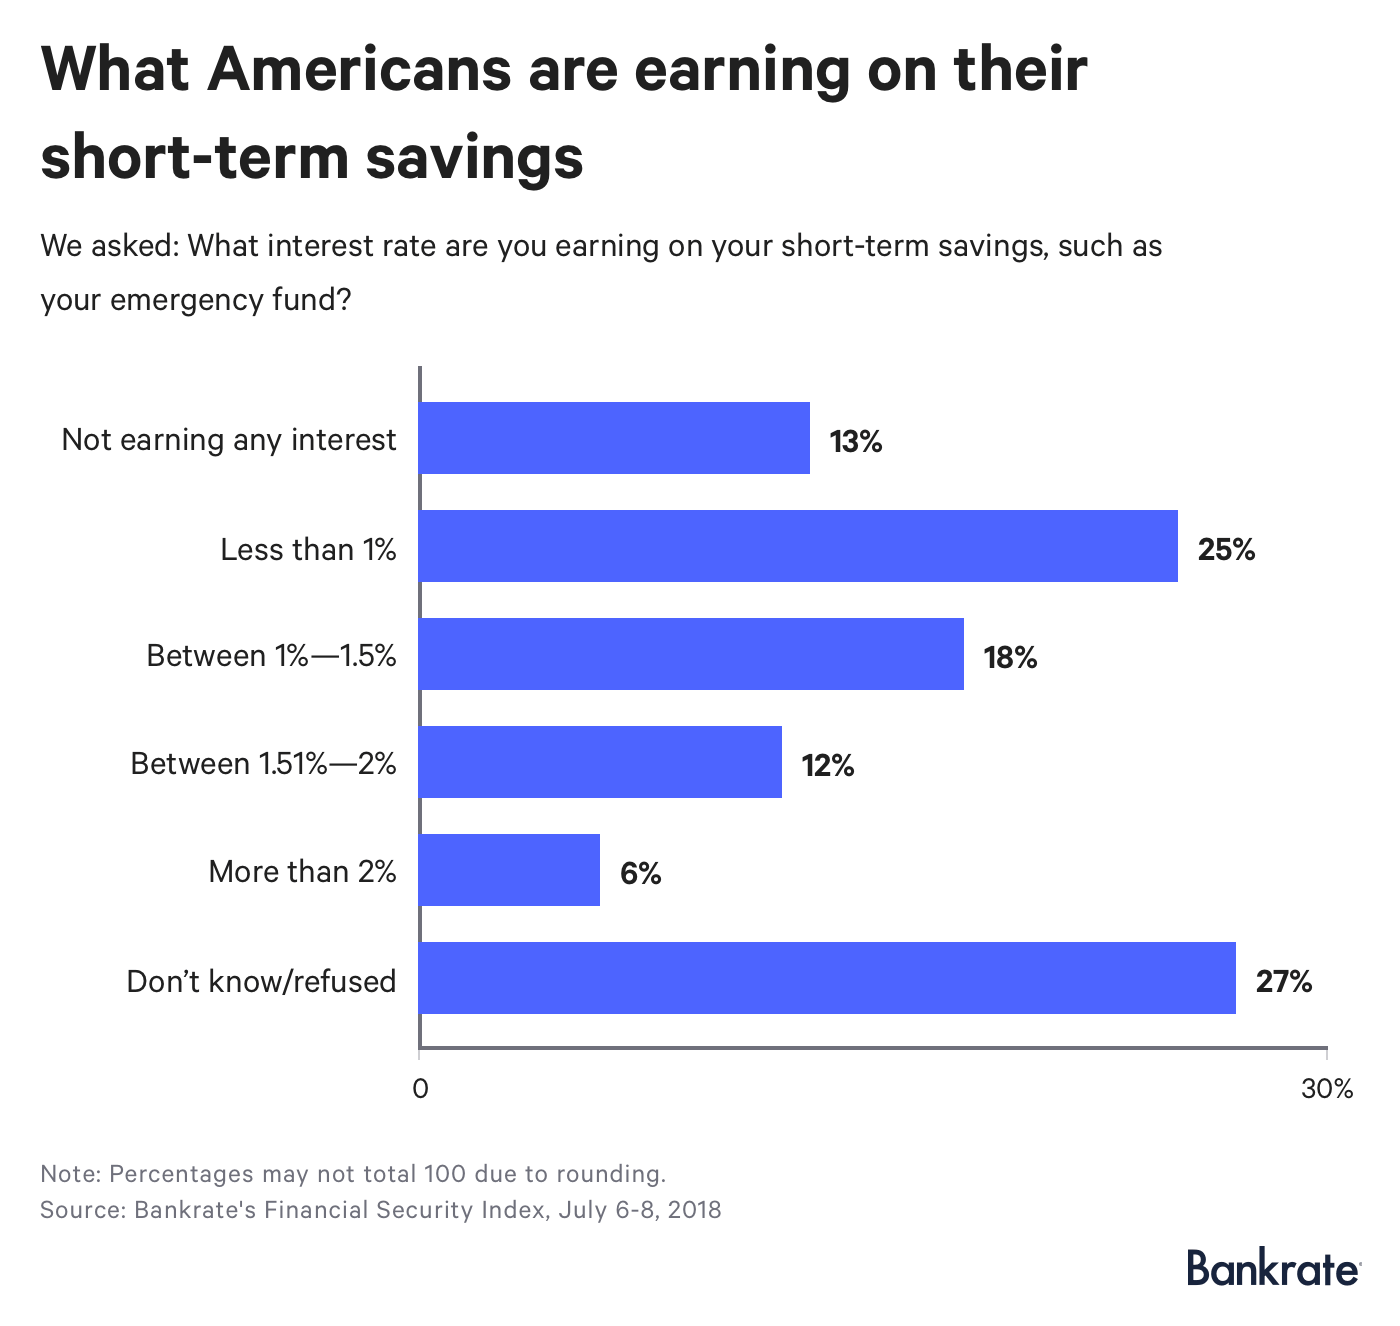 Survey: What Americans are earning on their short-term savings?